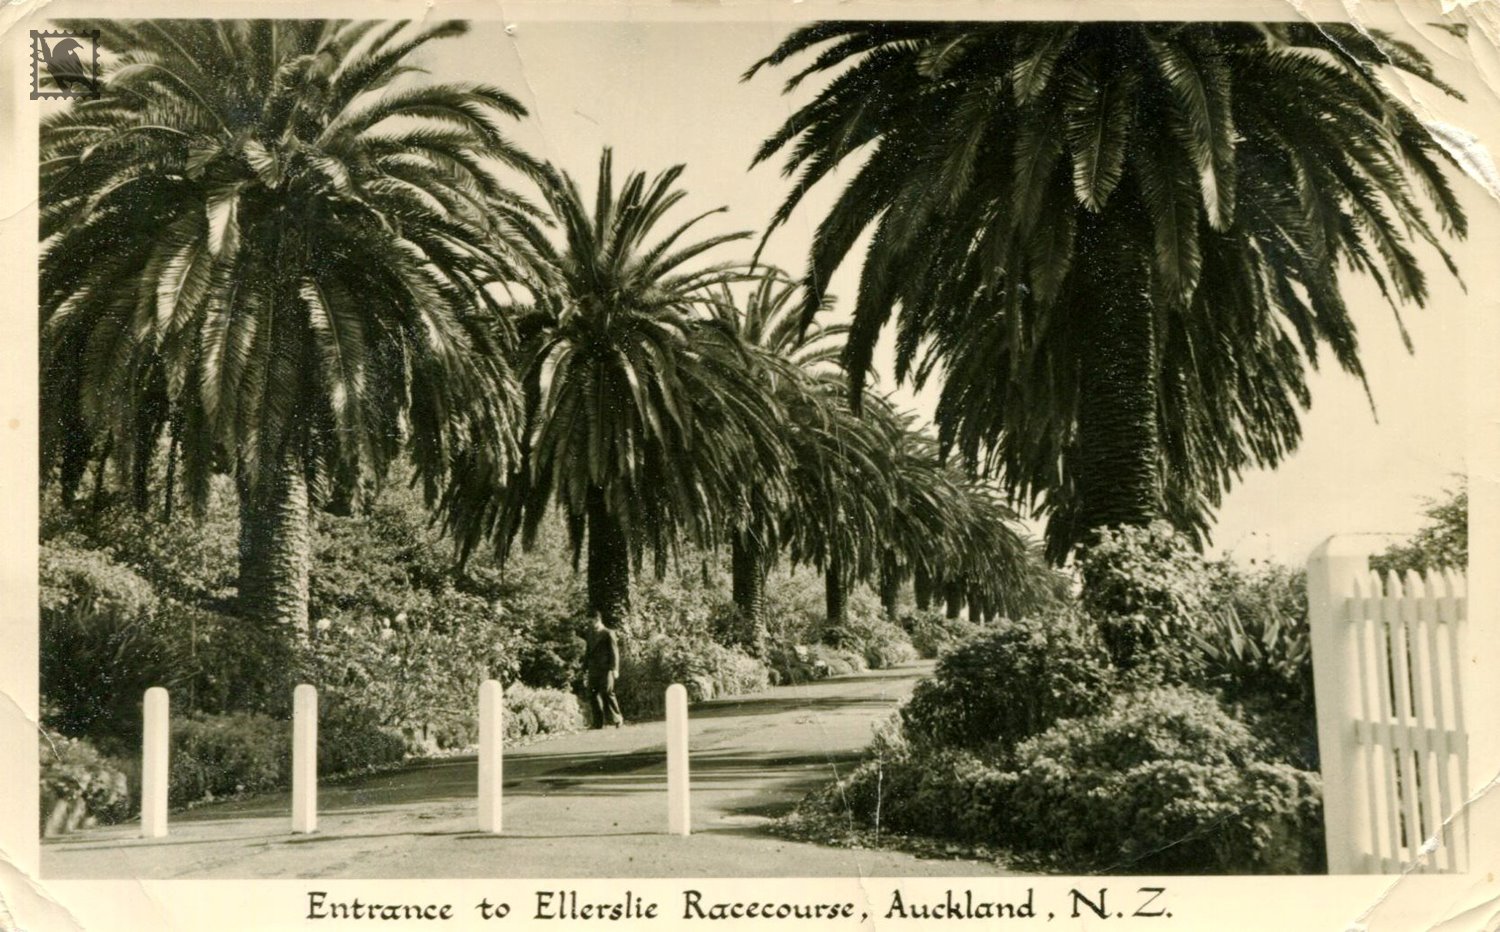 The Entrance way to the Ellerslie Racecourse